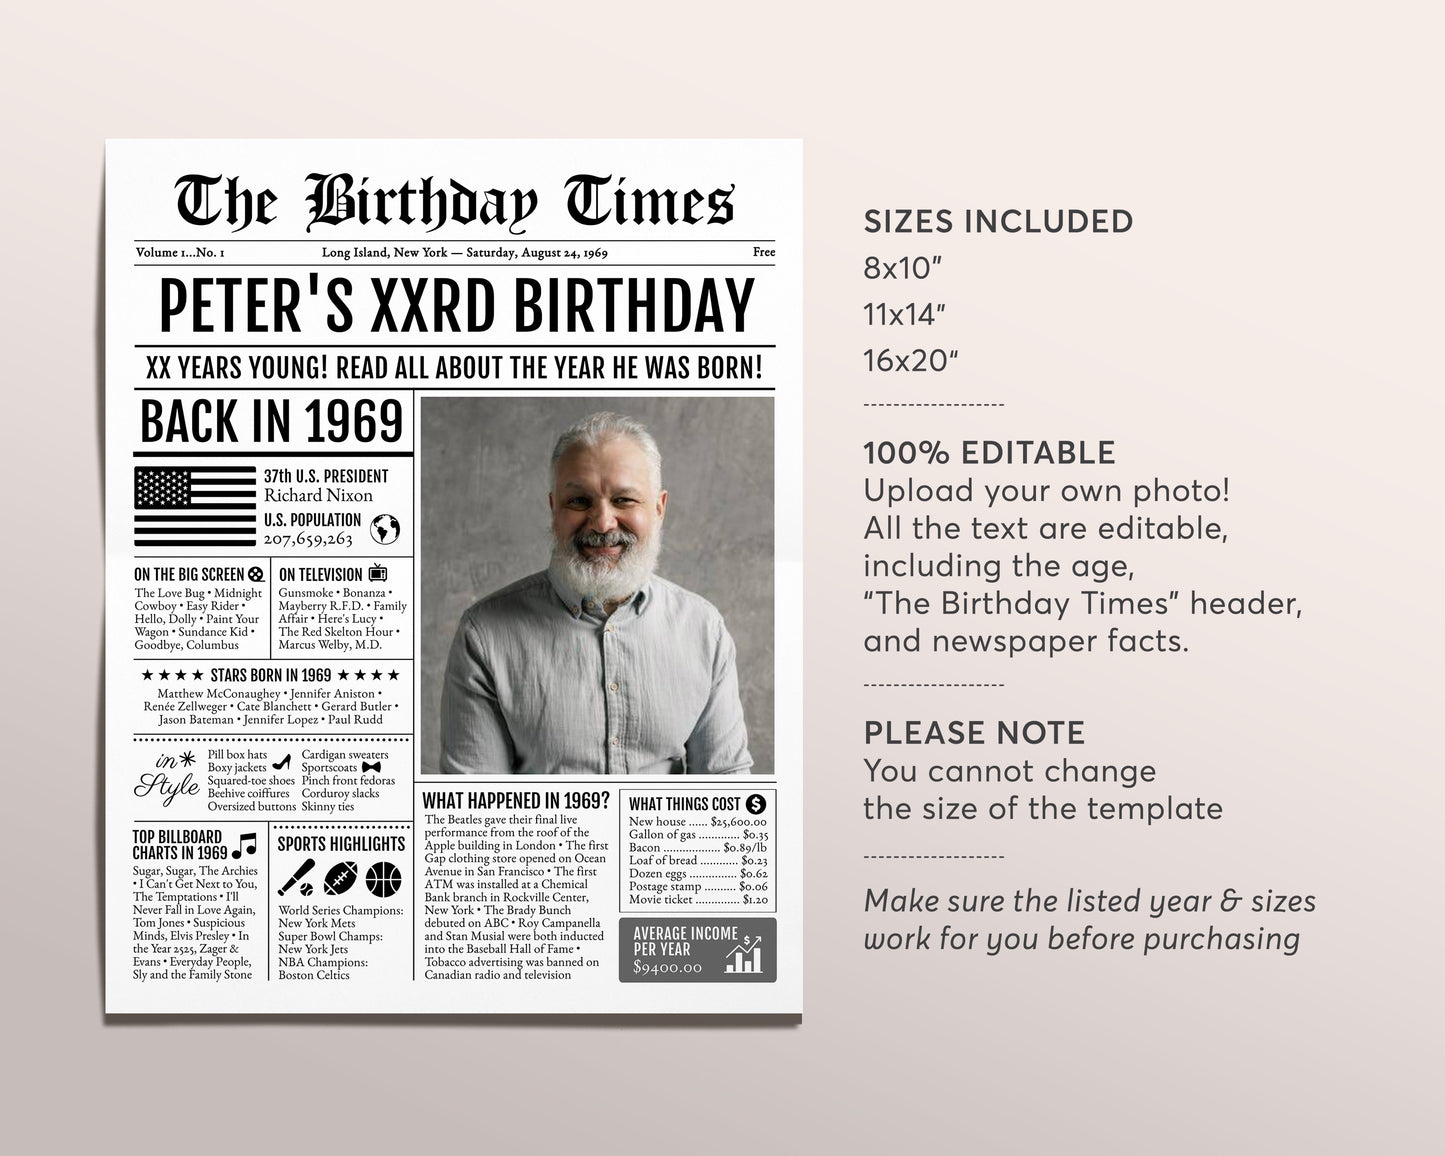 Back in 1969 Birthday Newspaper Editable Template, 54 55 56 Years Ago, 54th 55th 56th Birthday Sign Decorations Decor for Men or Women